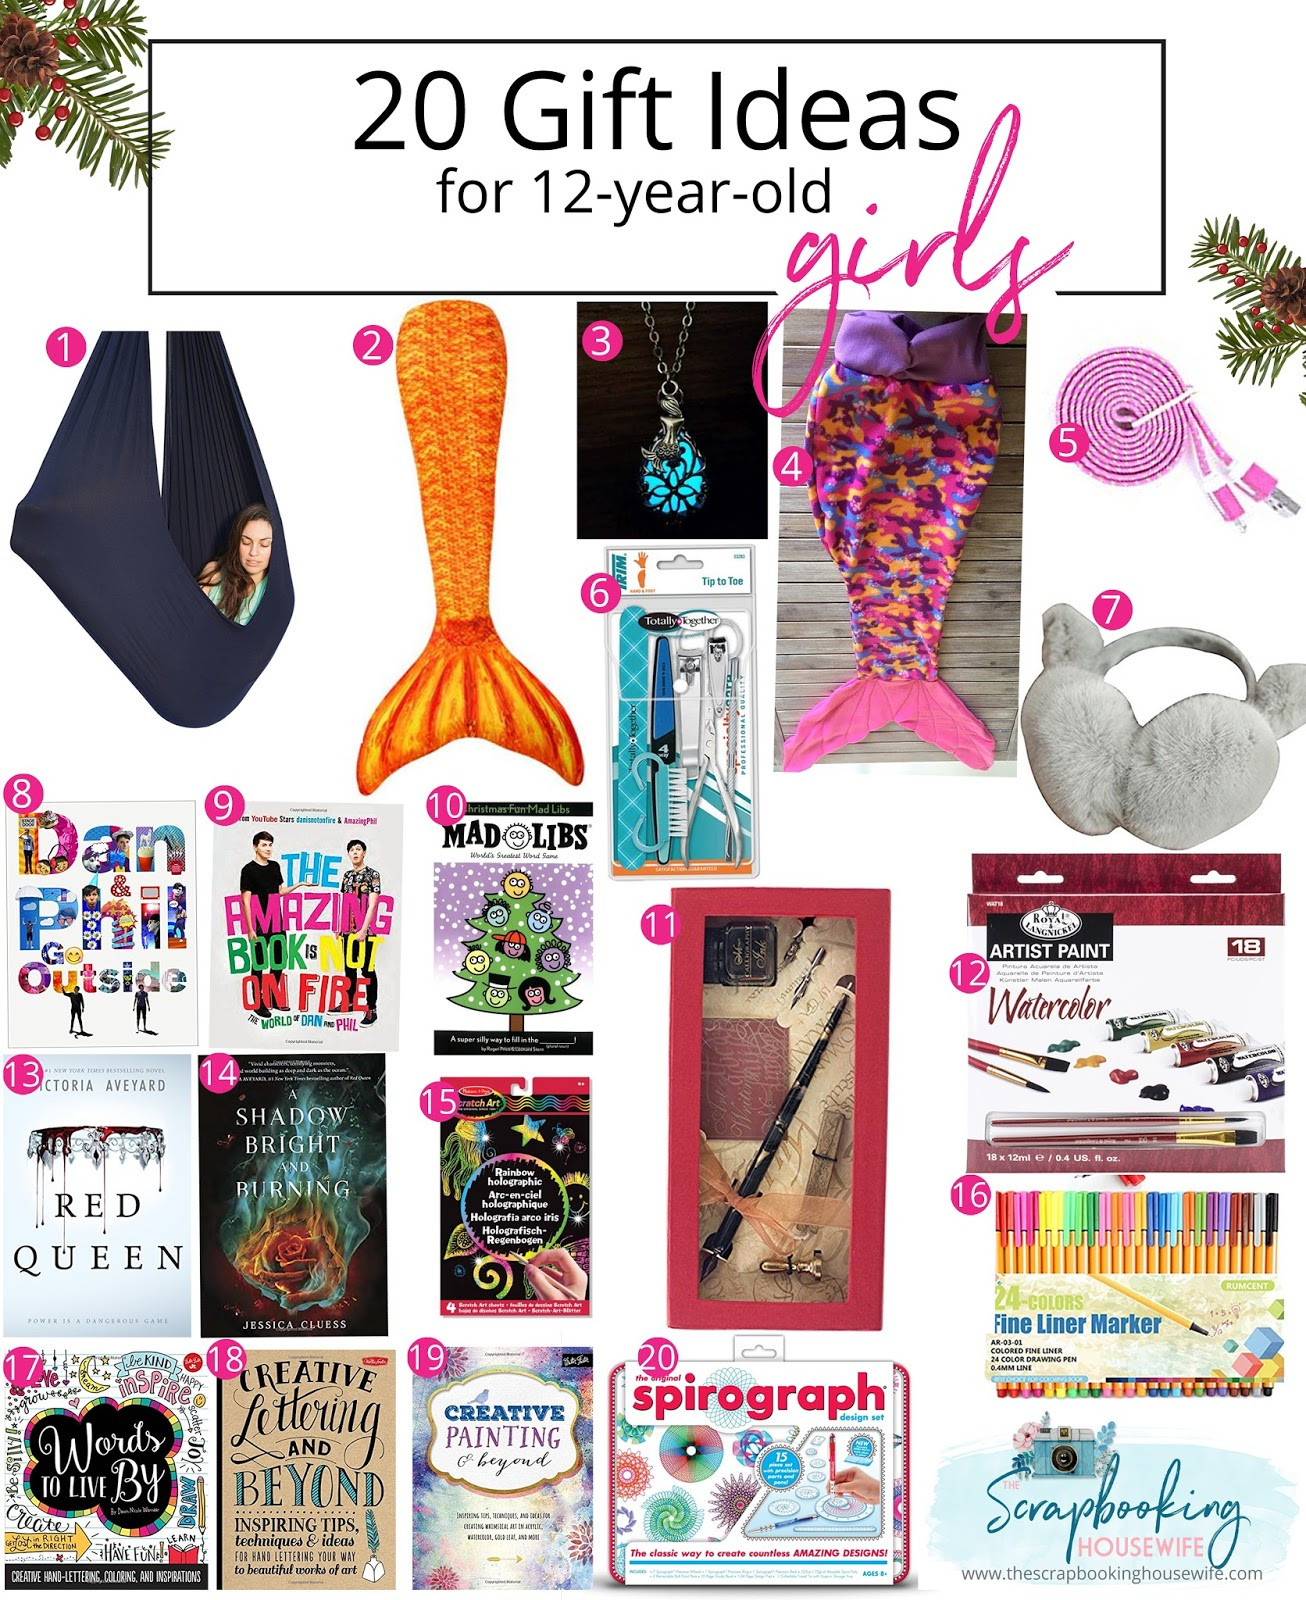 Birthday Gifts For 20 Year Old Female
 Ellabella Designs 13 GIFT IDEAS FOR TODDLERS